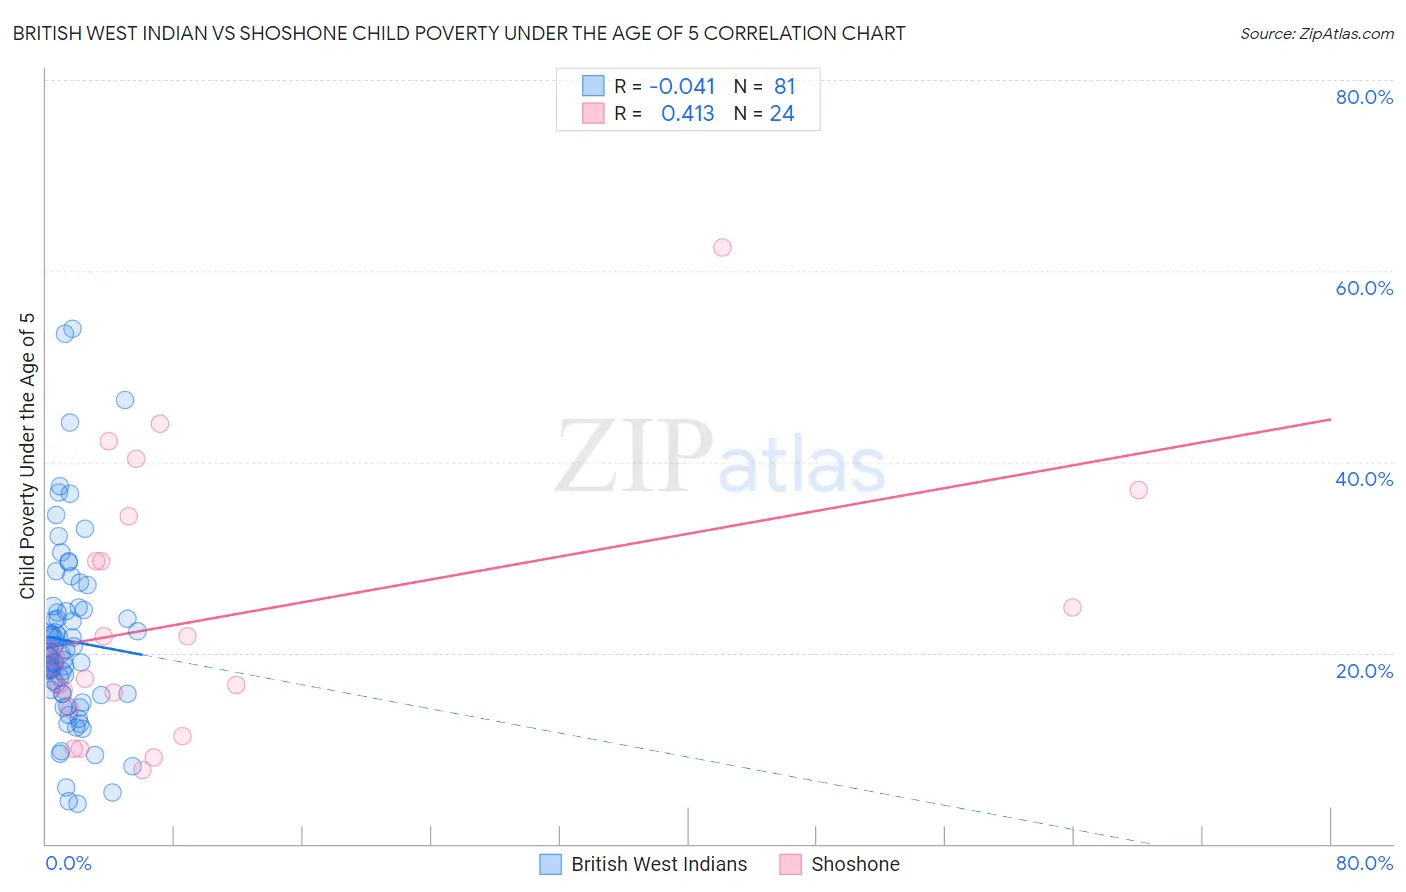 British West Indian vs Shoshone Child Poverty Under the Age of 5